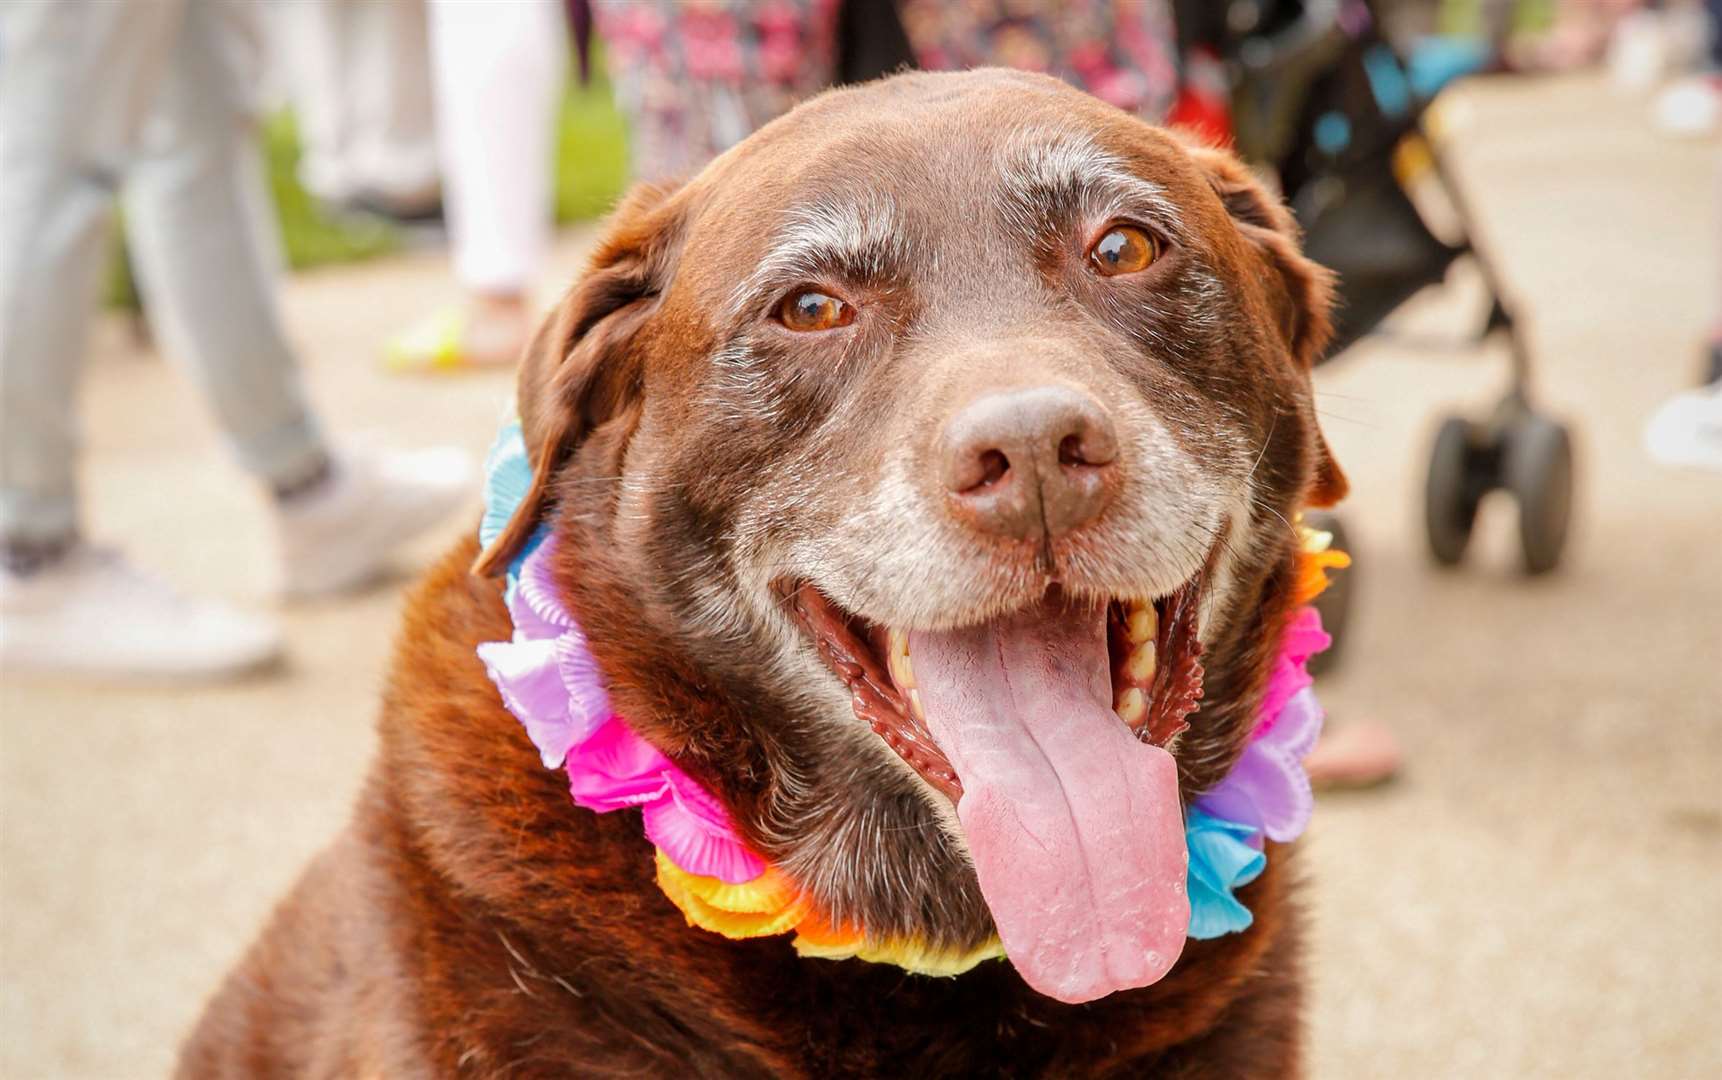 Harvey the chocolate lab with his pride garland in Tunbridge Wells